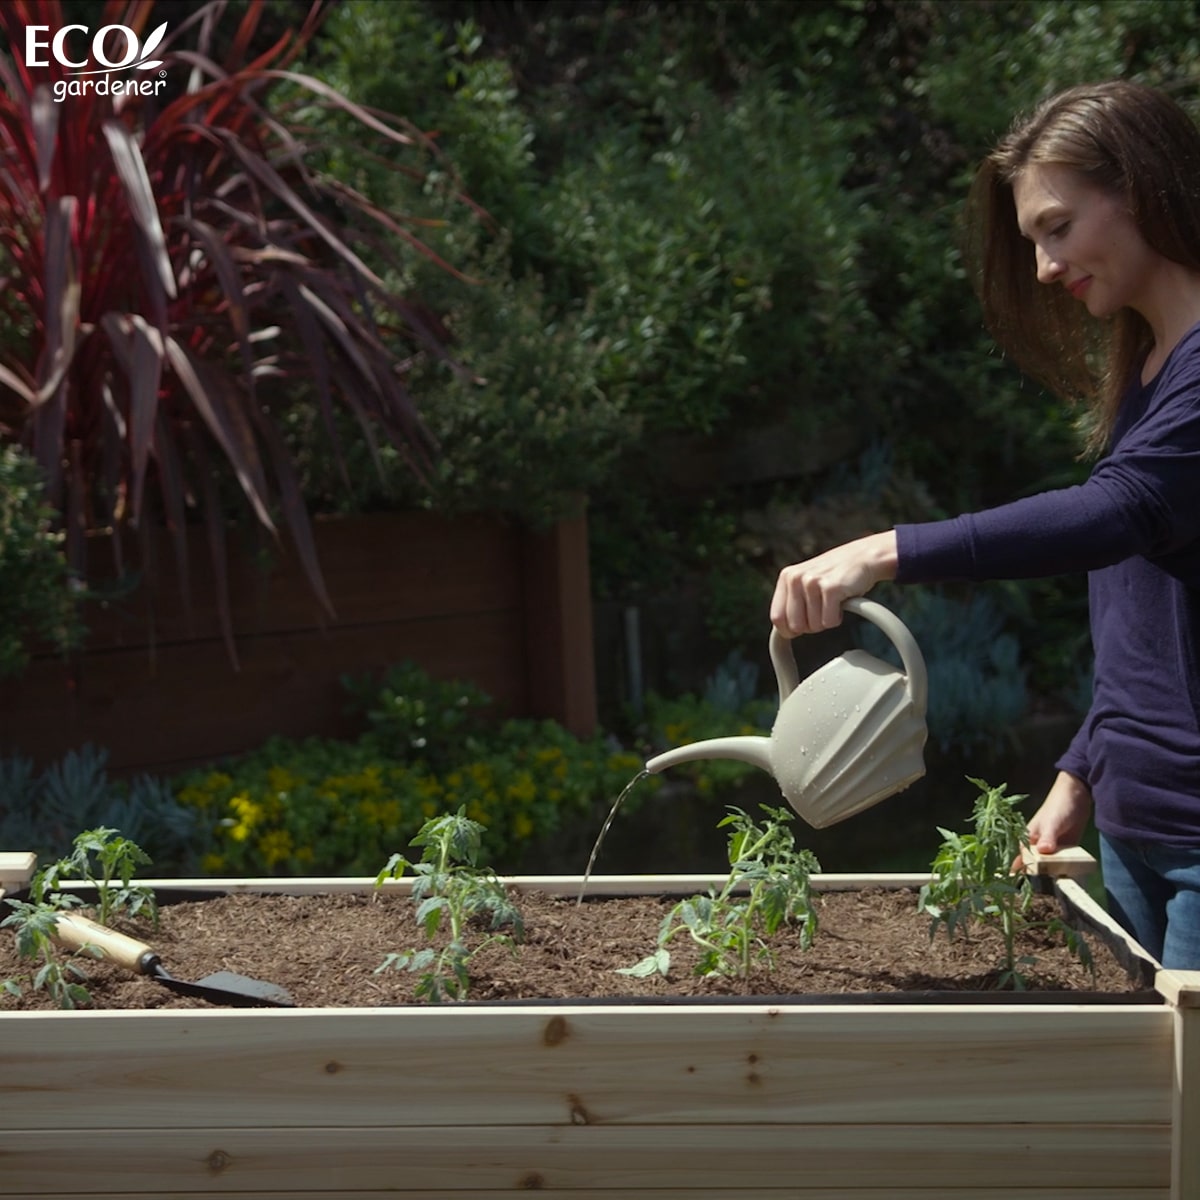 A woman watering her plants in Ecogardener elevated raised bed